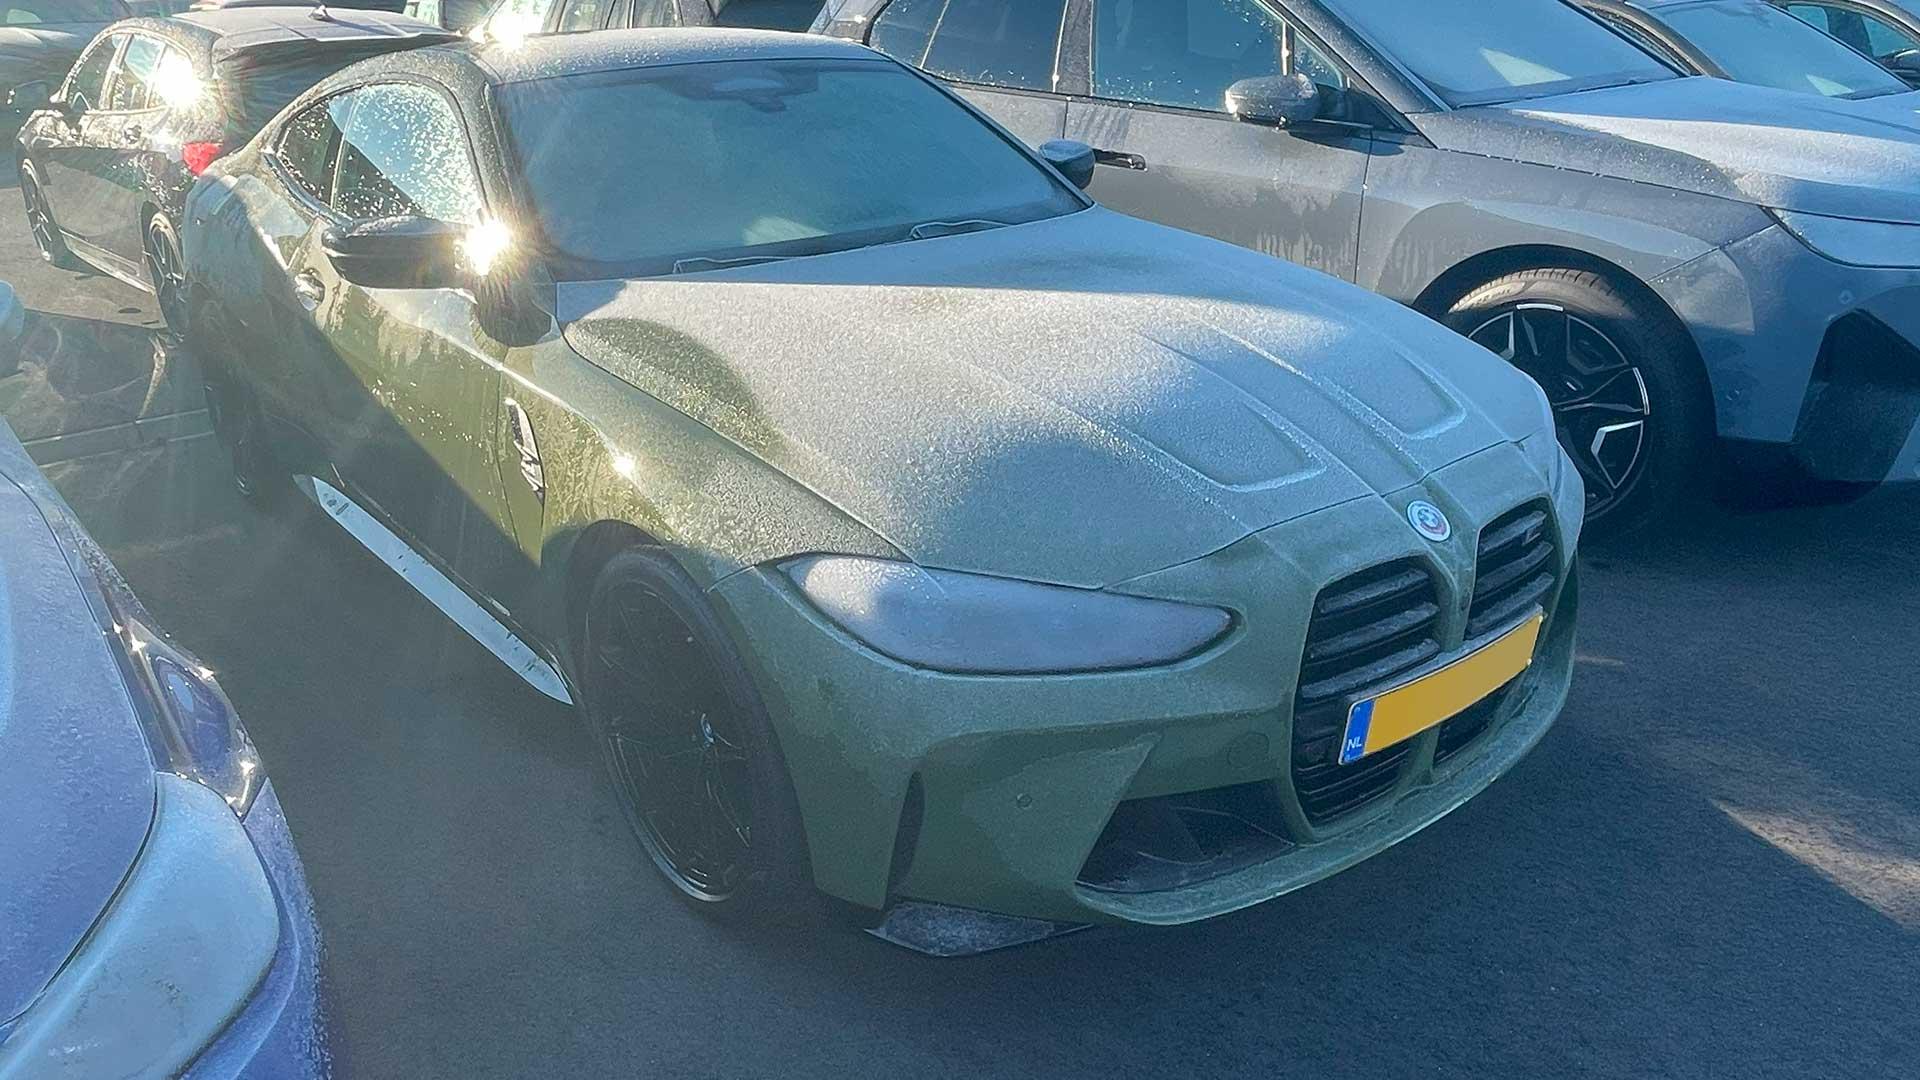 BMW M4 with ice on the windows (frost and scratches)